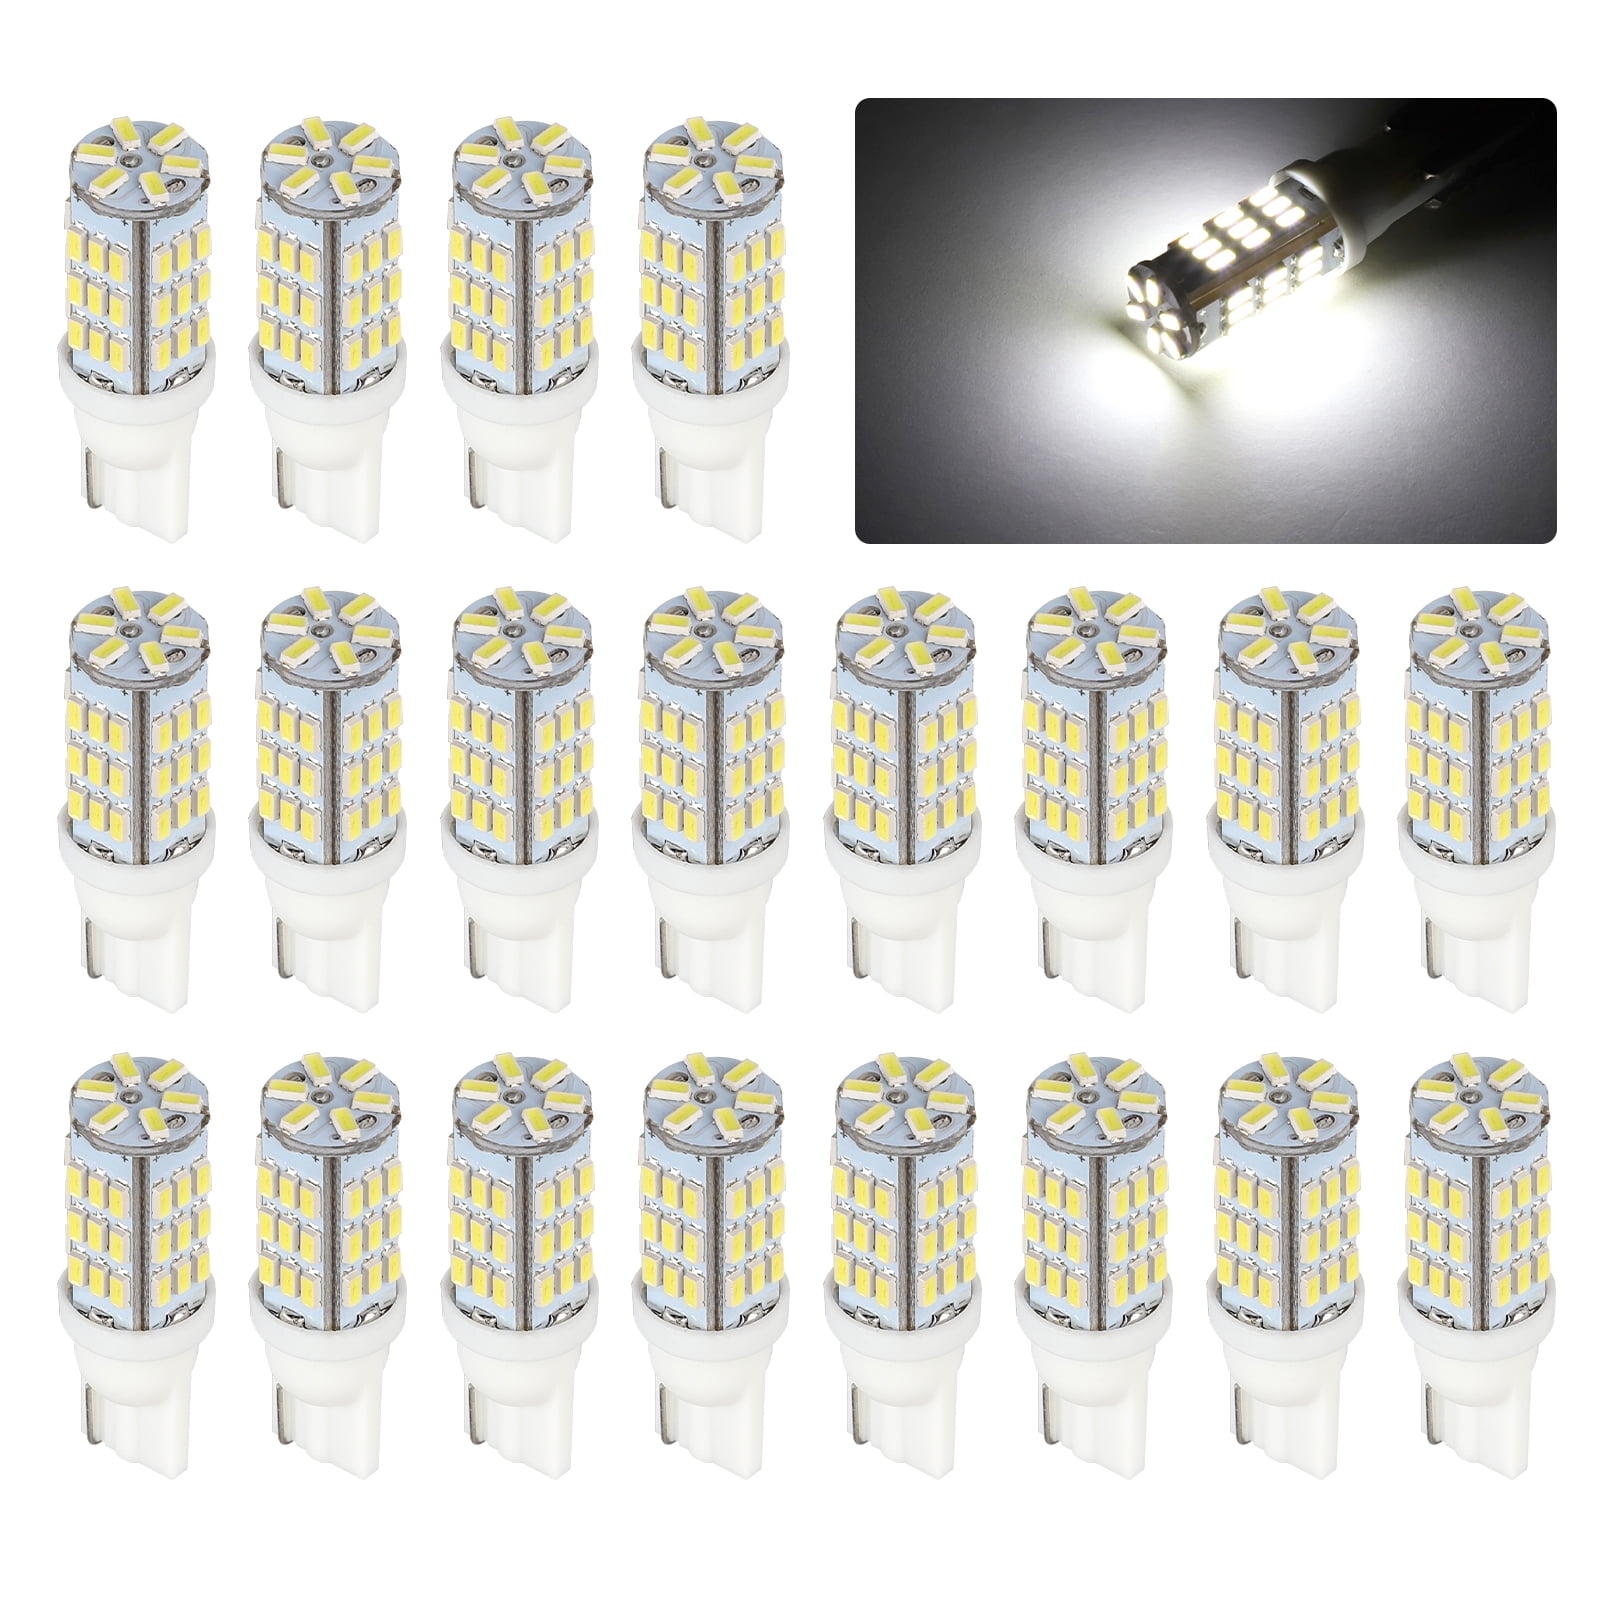 20x Pure White 10 SMD LED T10 194 921 W5W 1210 RV Landscaping Light Bulbs 12V 